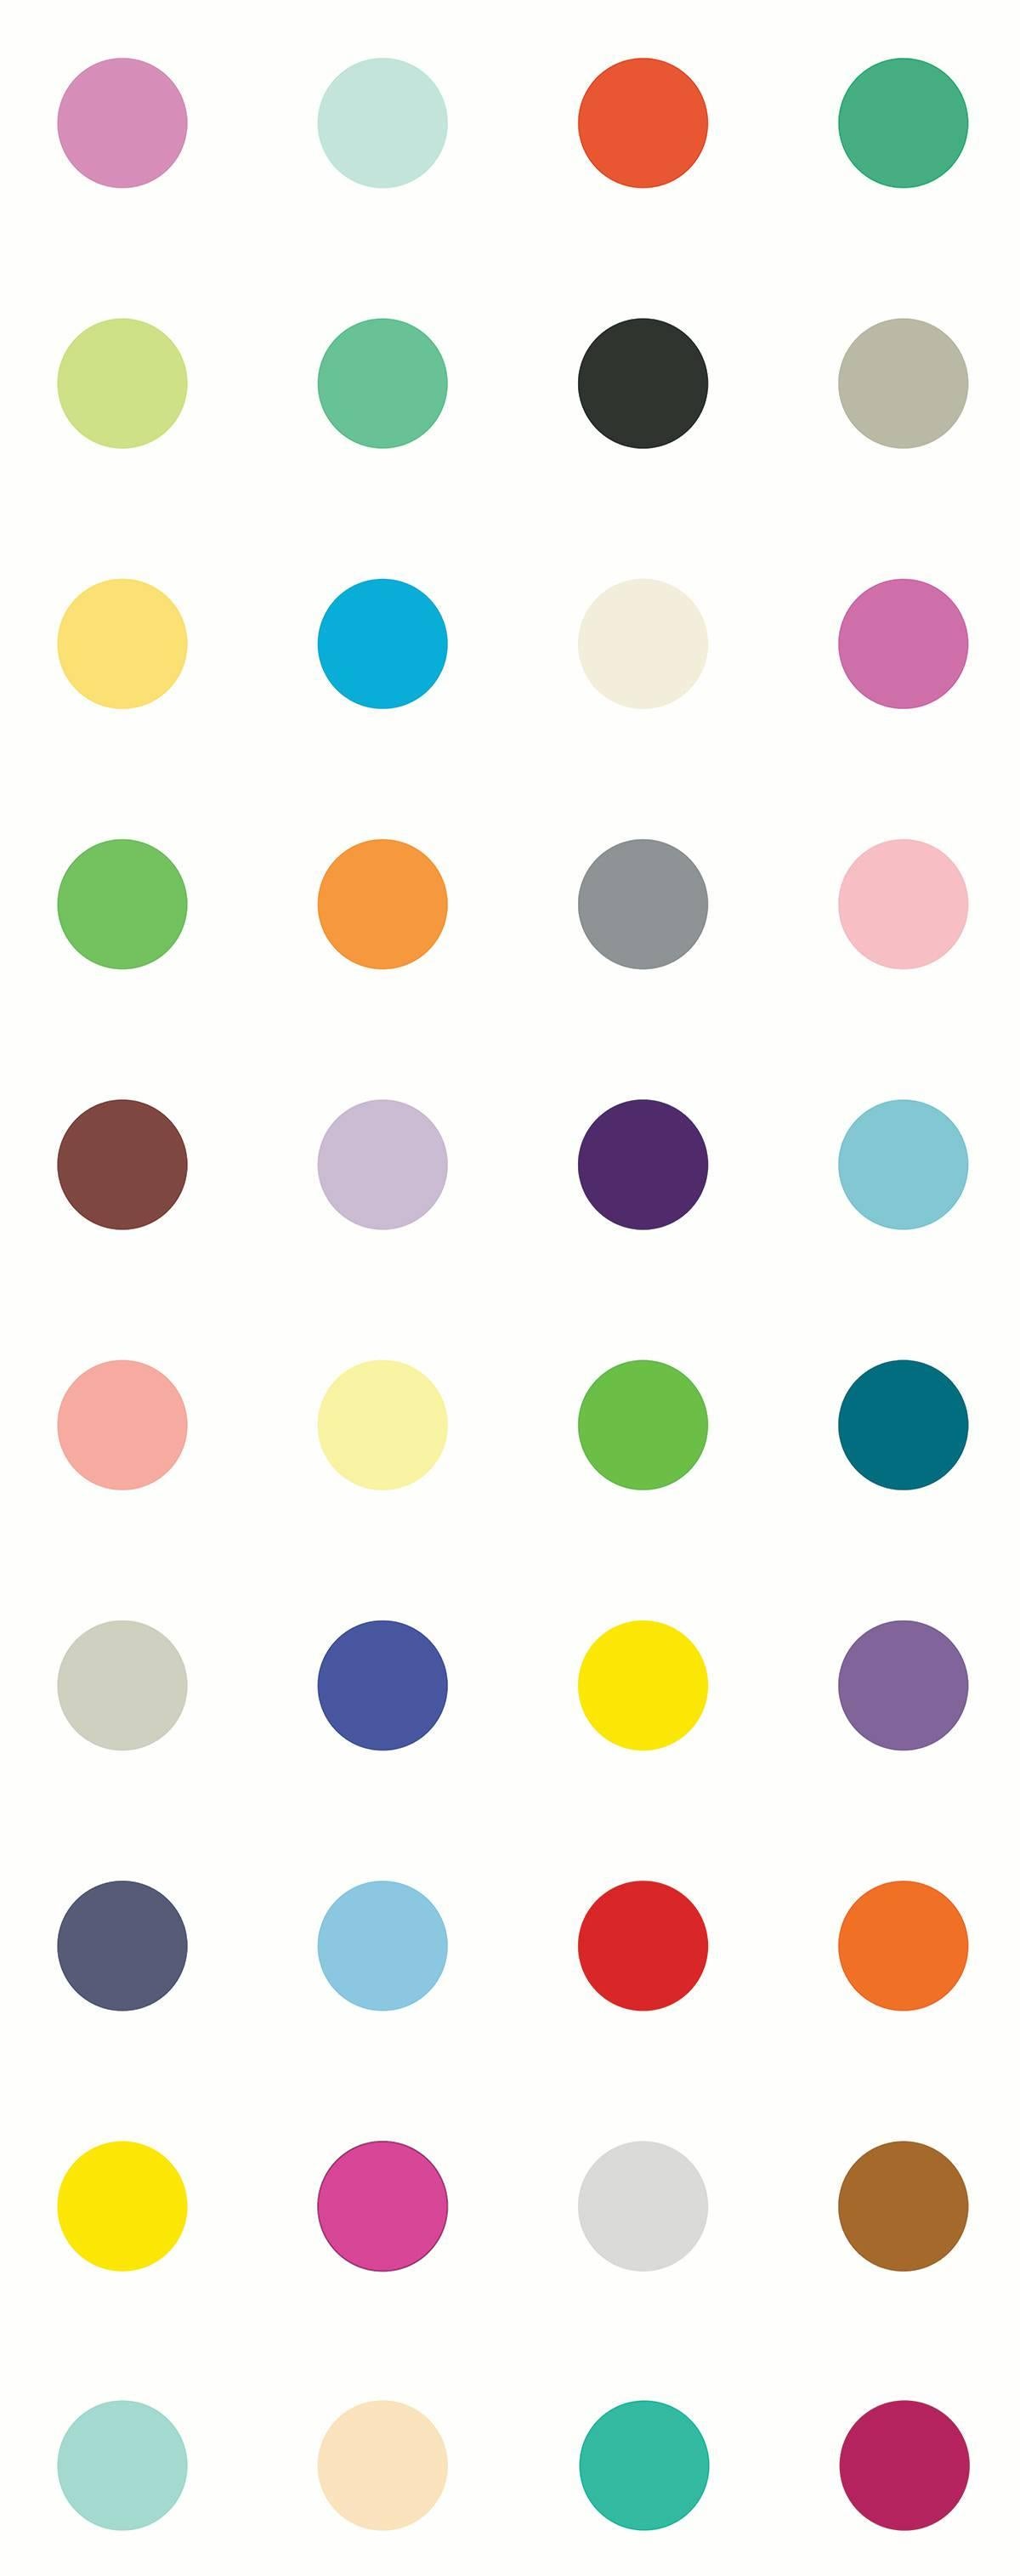 Inspired by Damien Hirst paintings and a recent custom hand painted nursery I did,
I created a colorful pattern of dots in wallpaper form. Fun for a kids room or a
modern living space.
Sold by the roll
Roll size: 48” wide by 9’ long (comes in